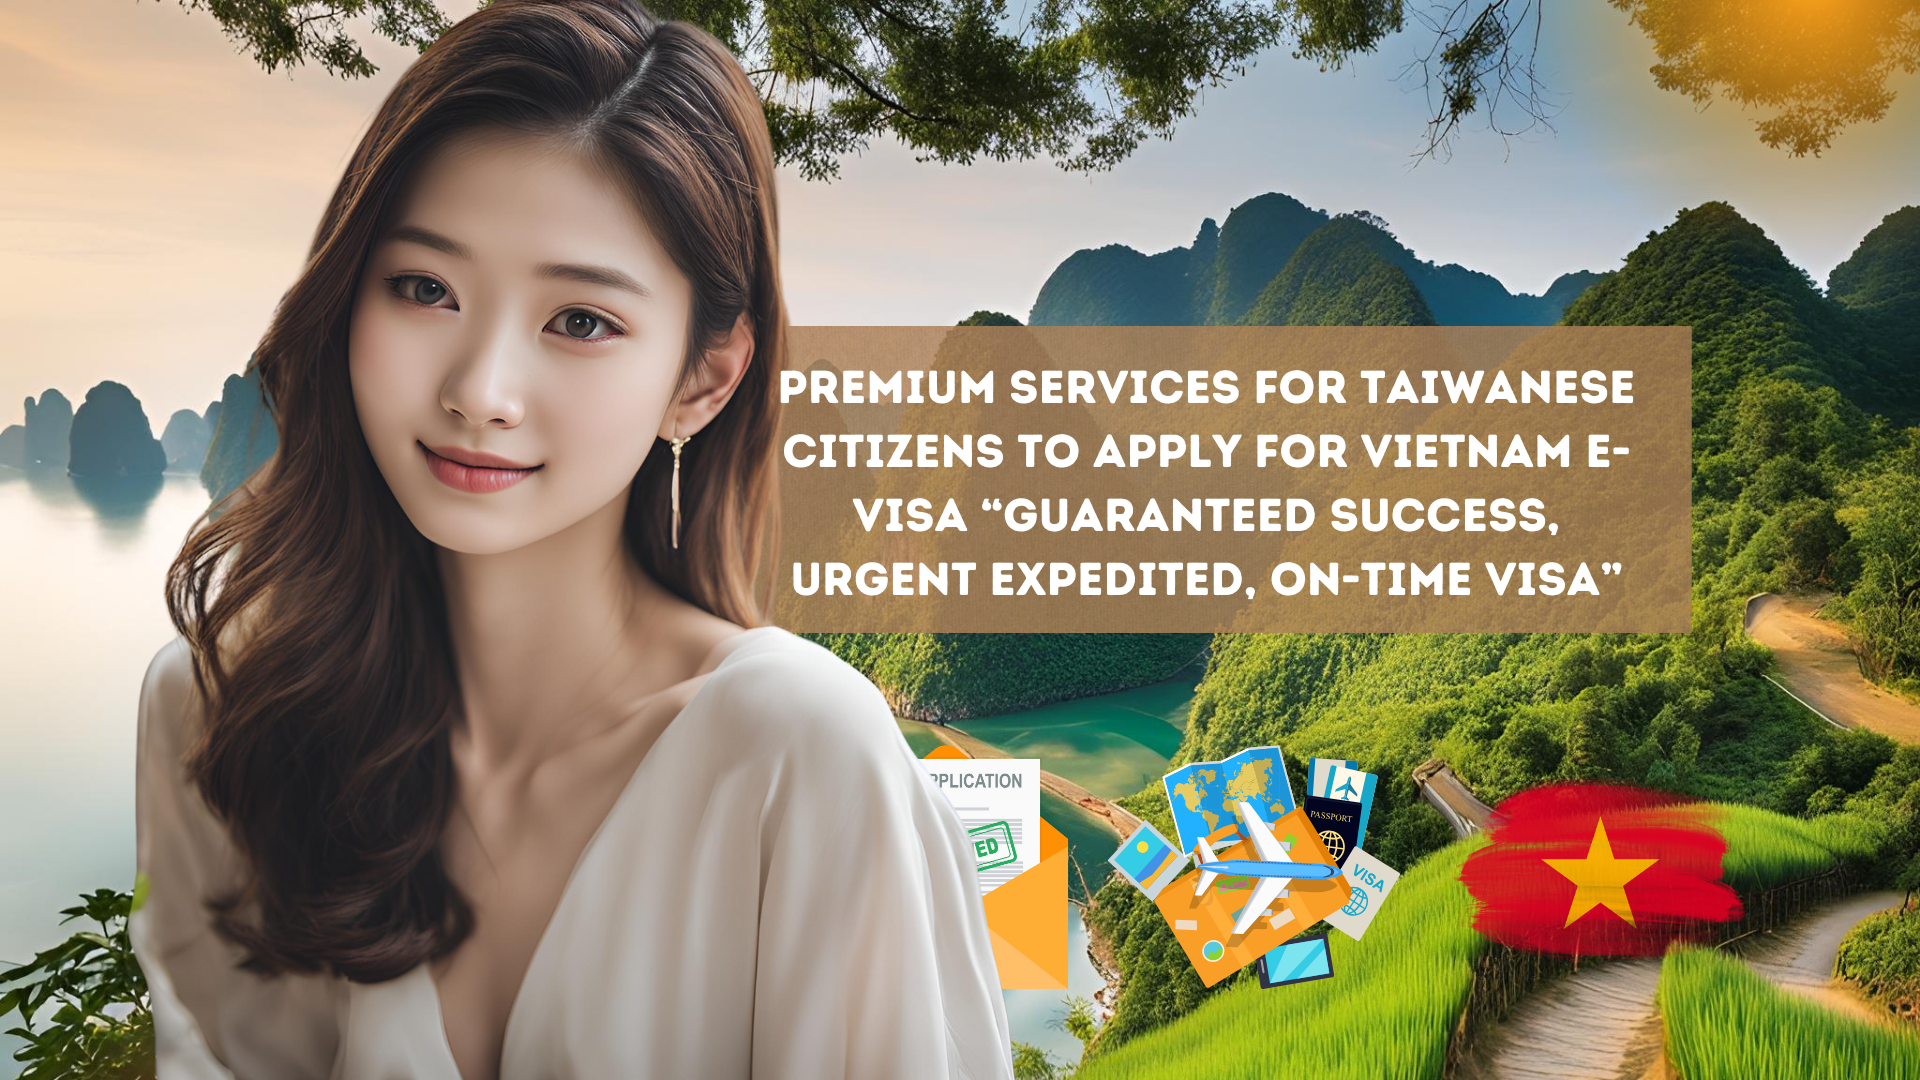 Premium Services for Taiwanese Citizens to apply for Vietnam e-visa “Guaranteed success, urgent expedited, on-time visa”